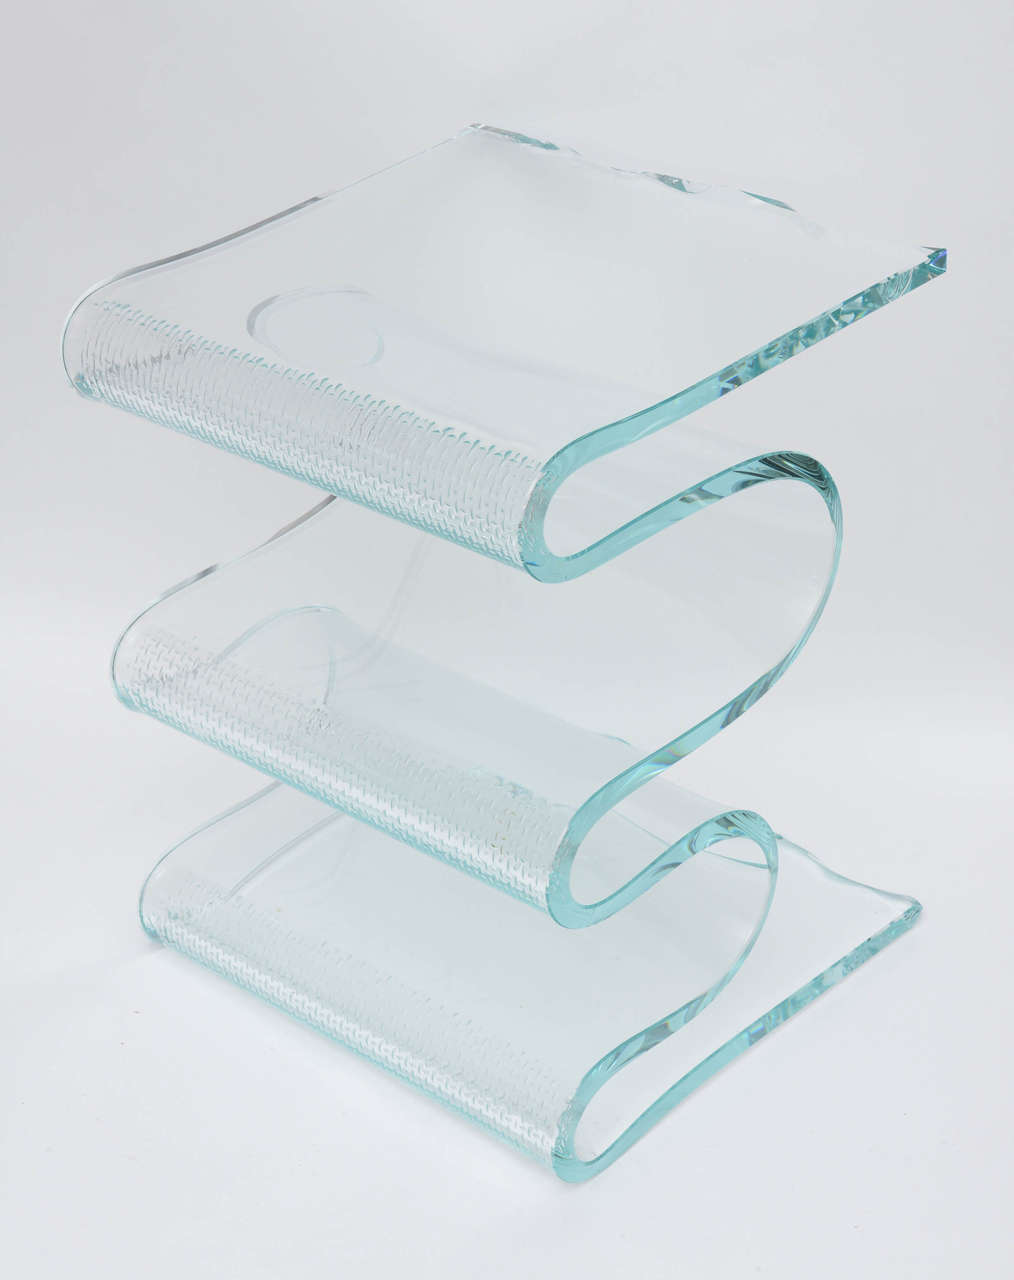 Abstract Glass Waterfall Table 3